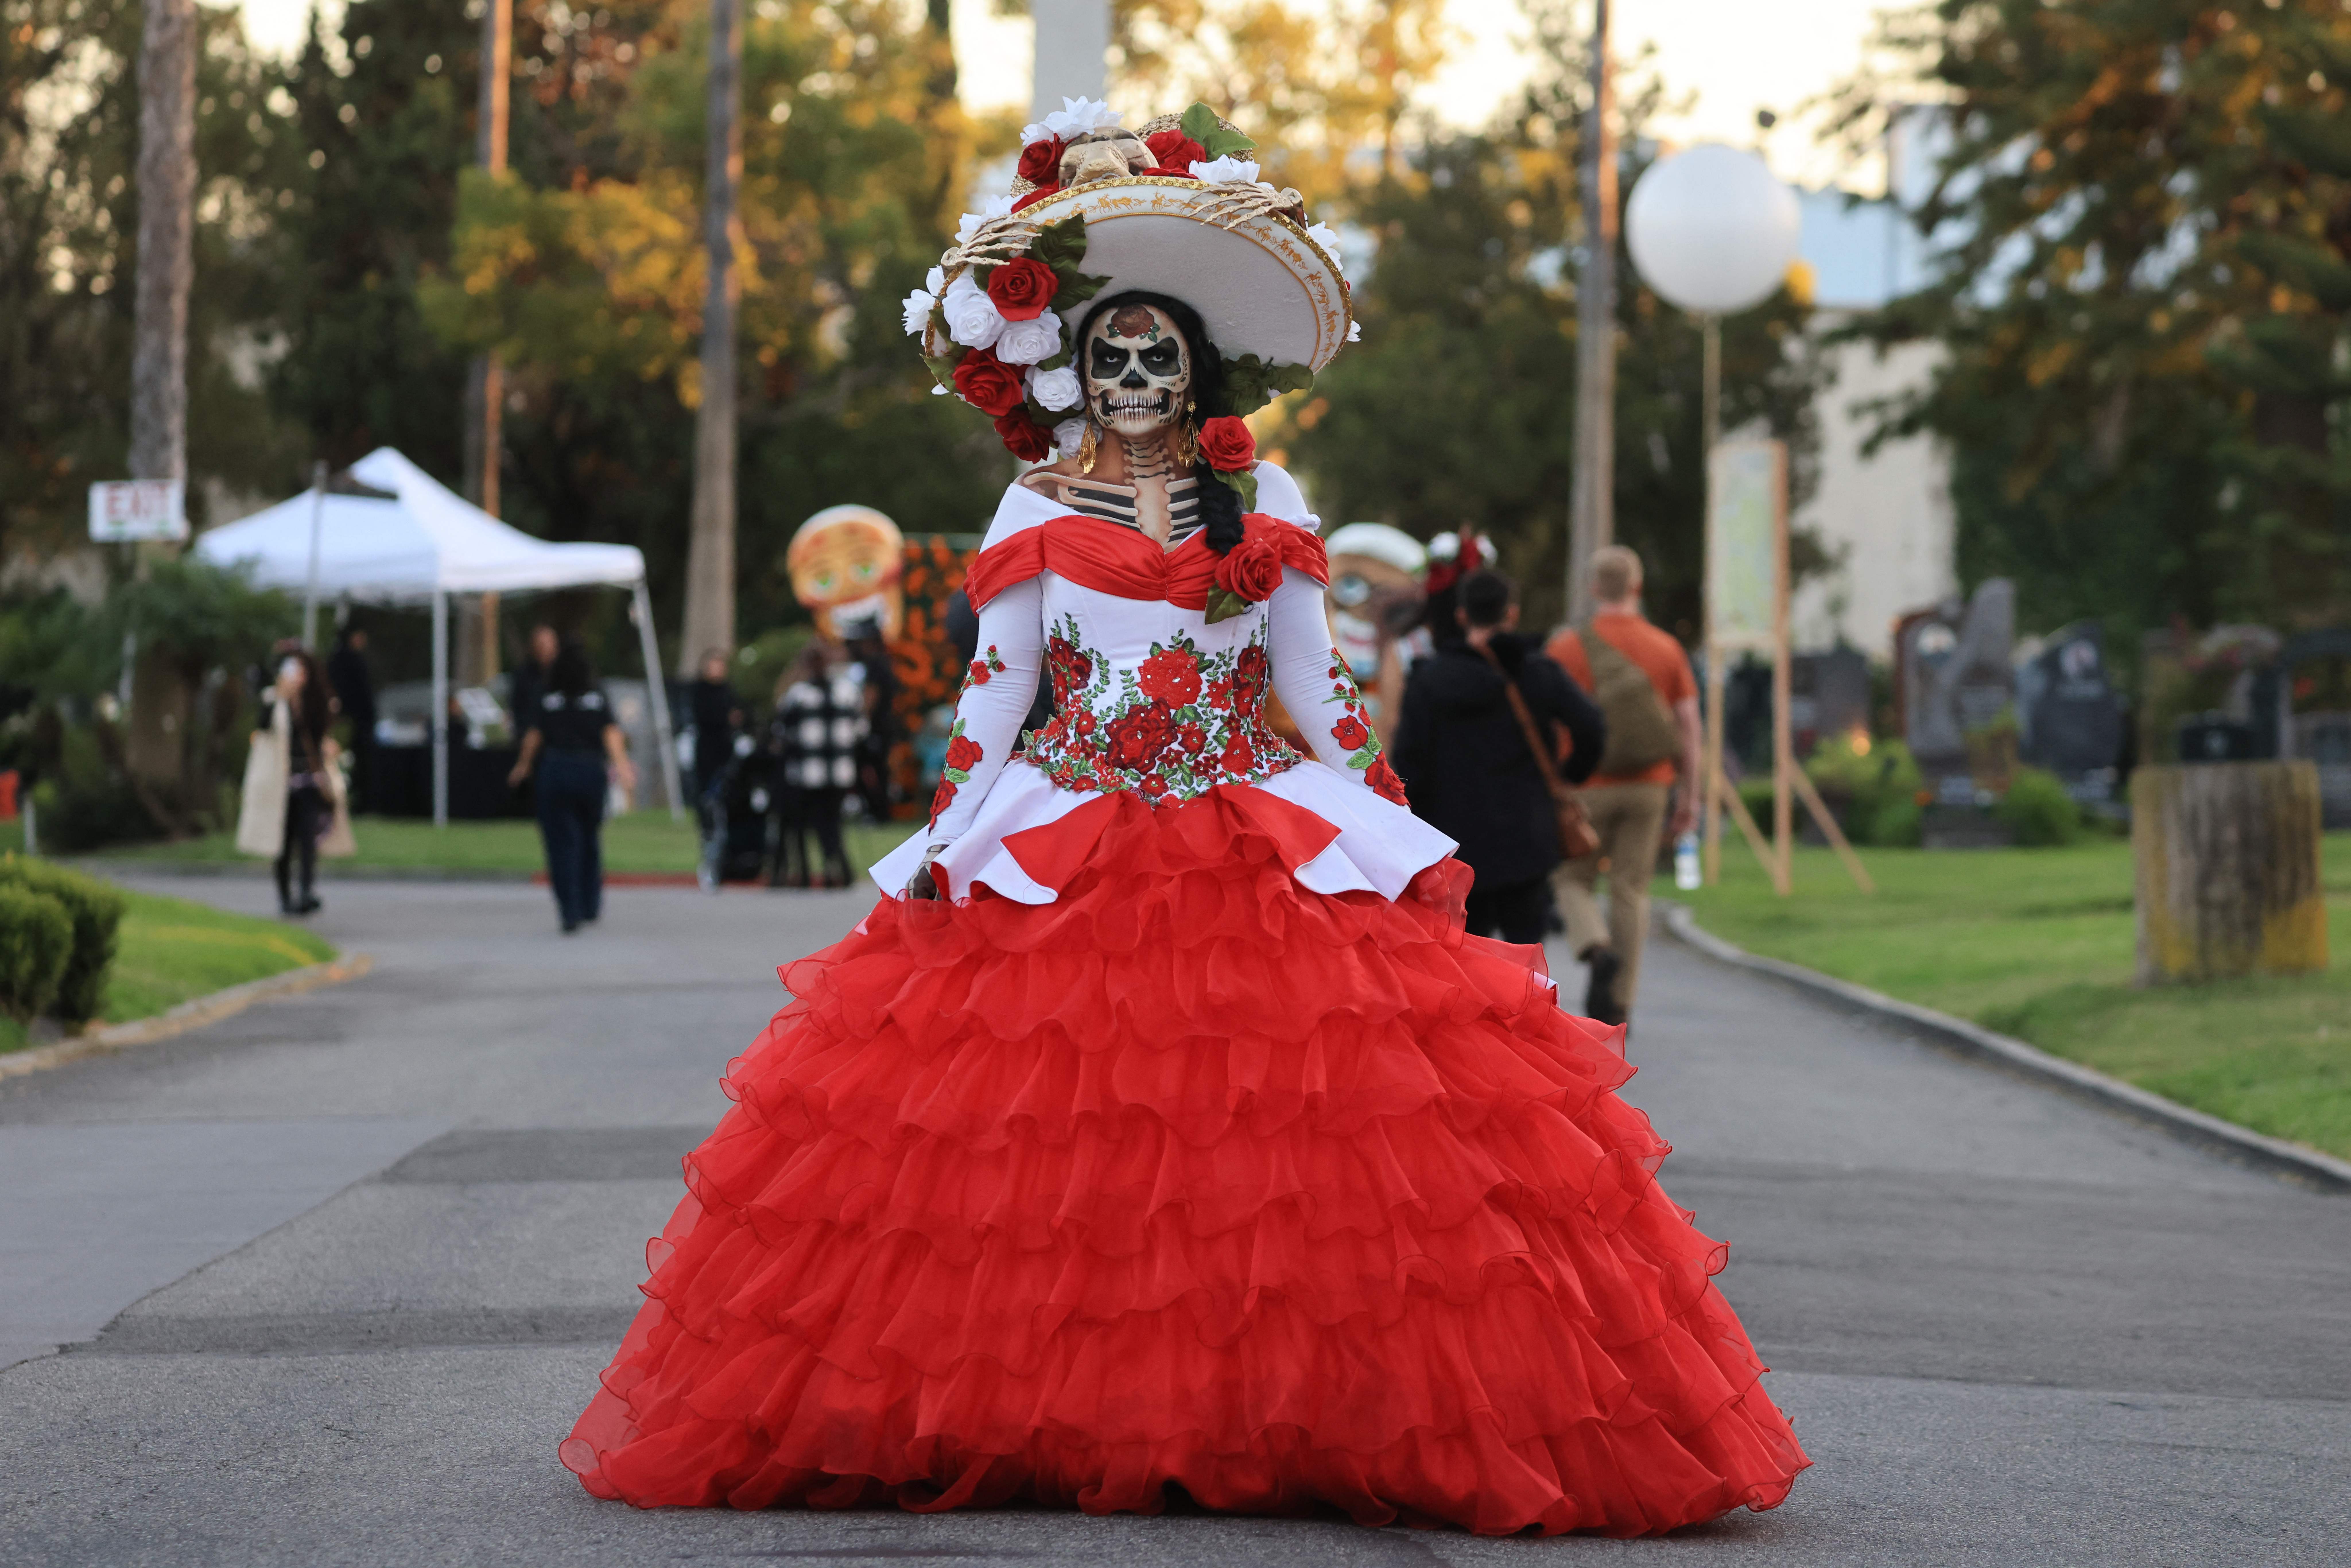 US-TRADITION-DAY OF THE DEAD